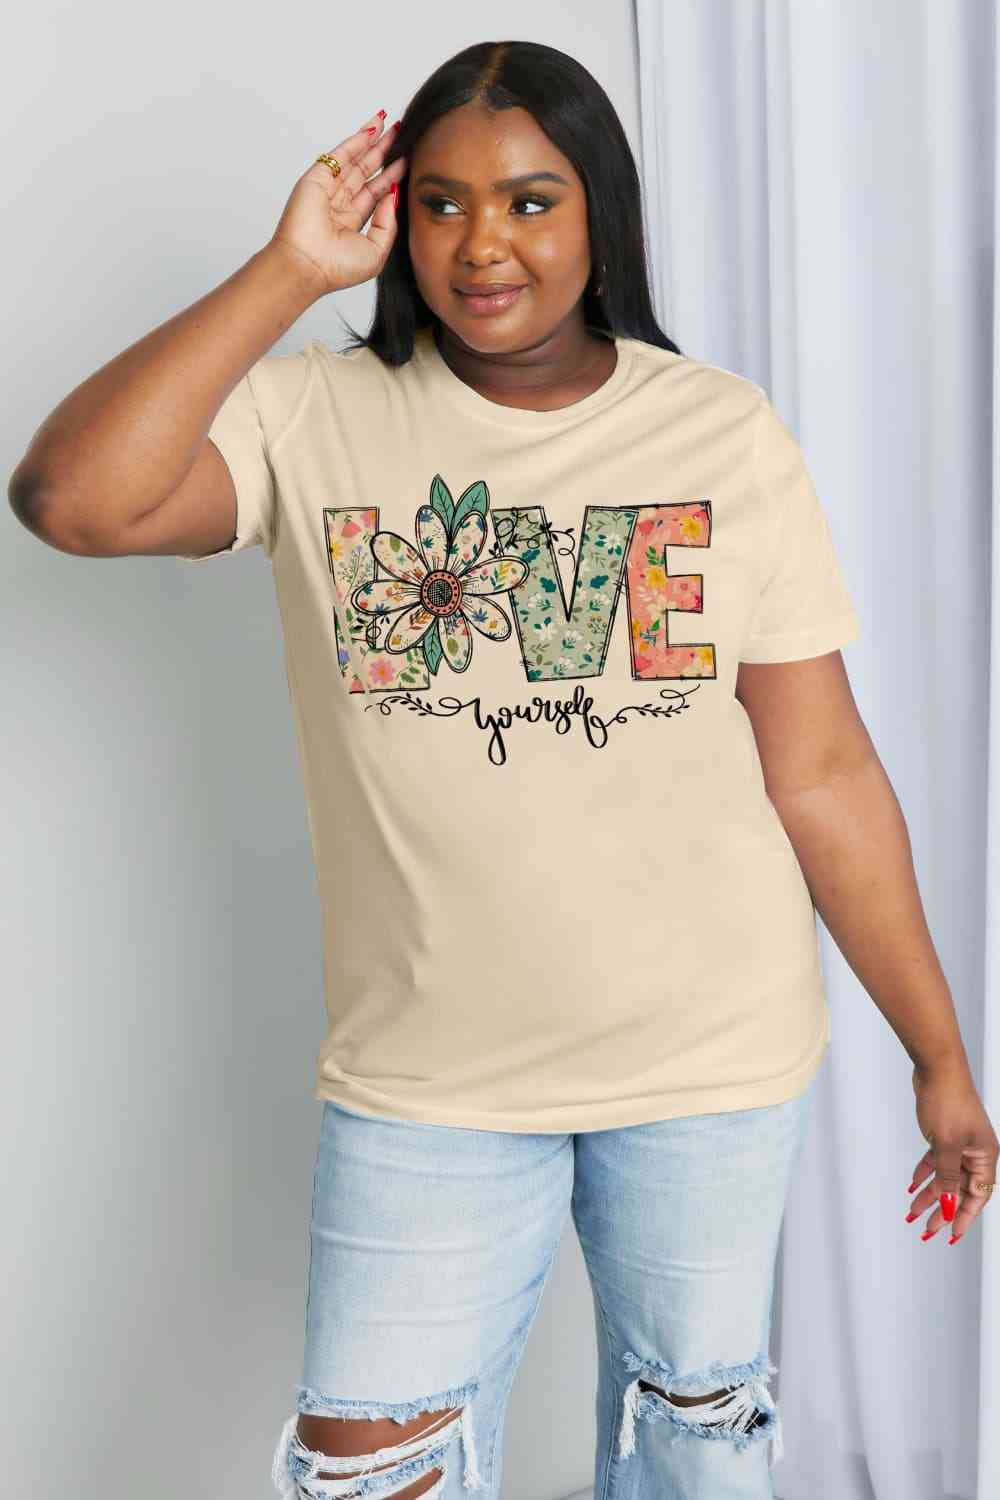 LOVE YOURSELF Graphic Cotton Tee - T-Shirts - Shirts & Tops - 6 - 2024